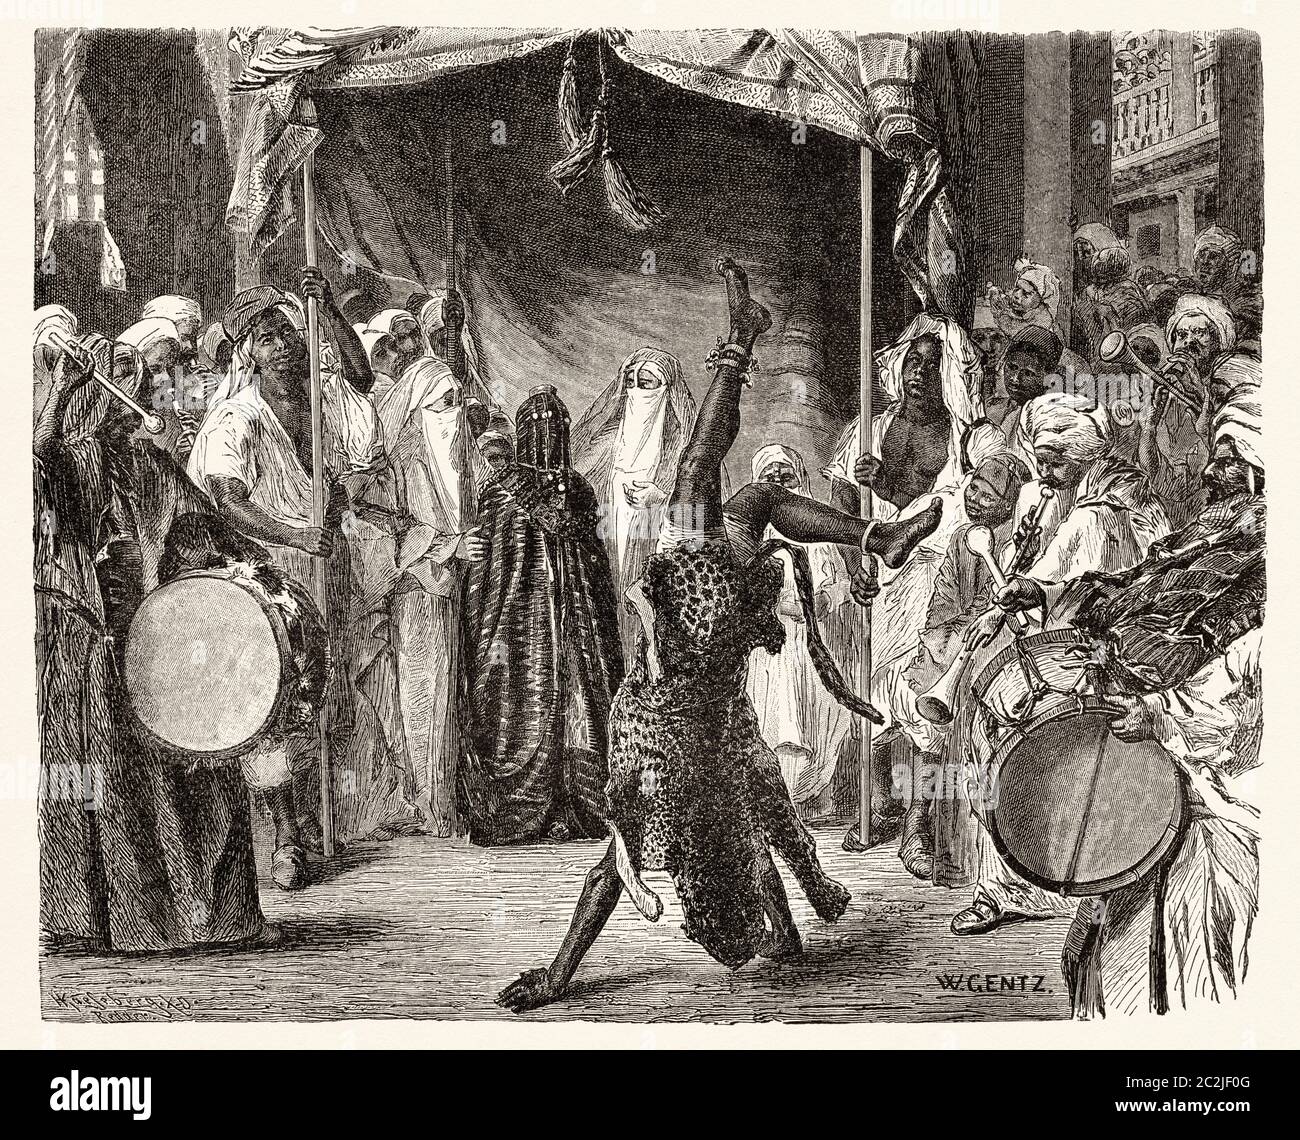 ENGRAVING: The Royal Wedding at Coburg: The Bridal Trousseau . engravng  from The Illustrated London News, May 5, 1894 by Illustrated London News:  Very Good Unbound (1894) 1st.